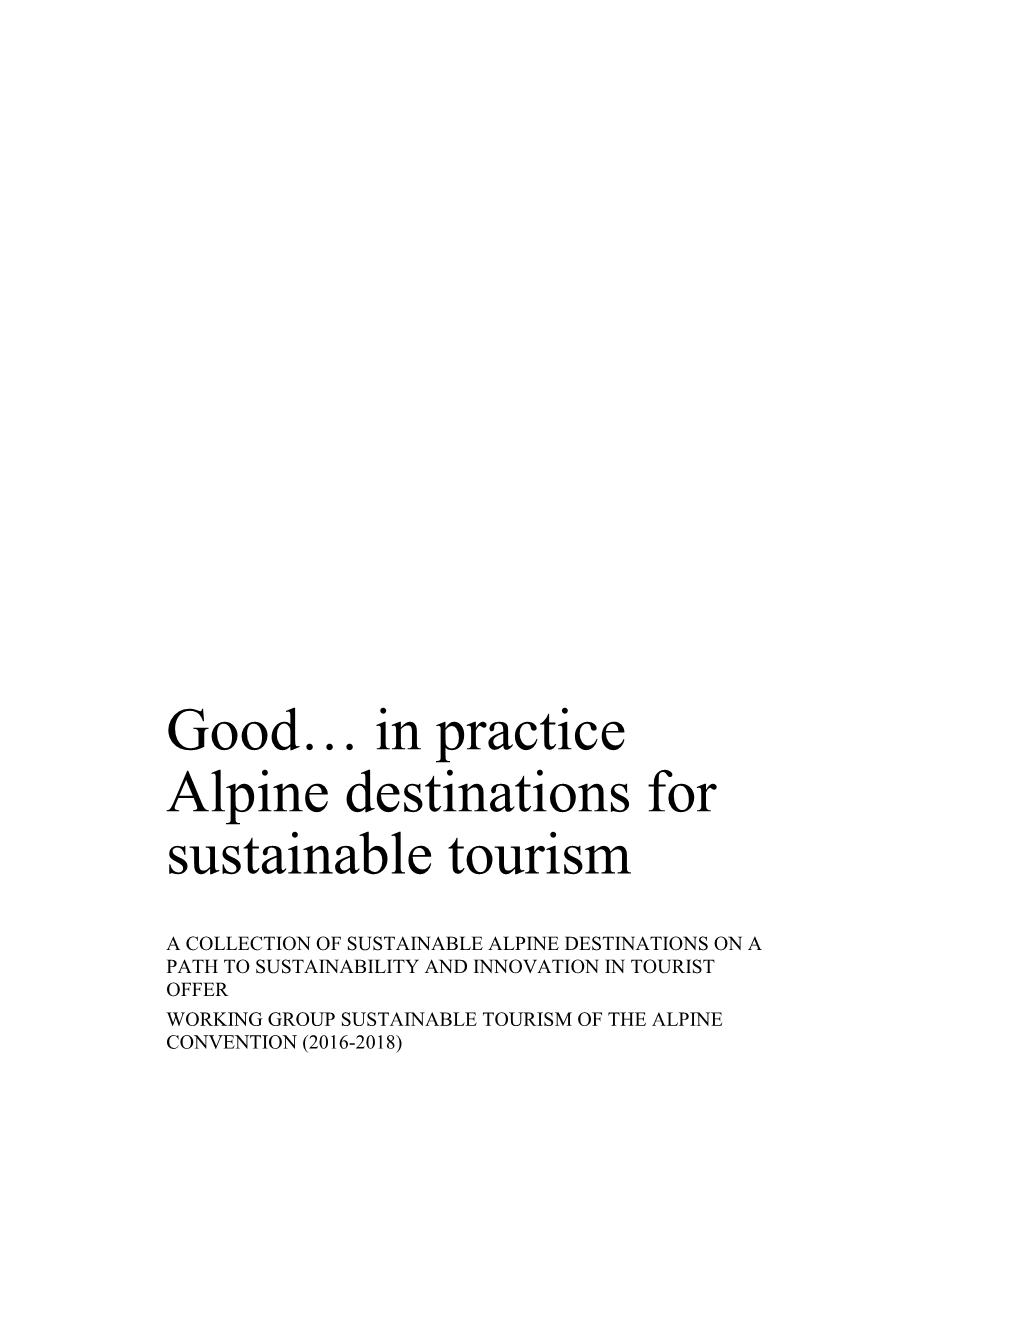 Good… in Practice Alpine Destinations for Sustainable Tourism